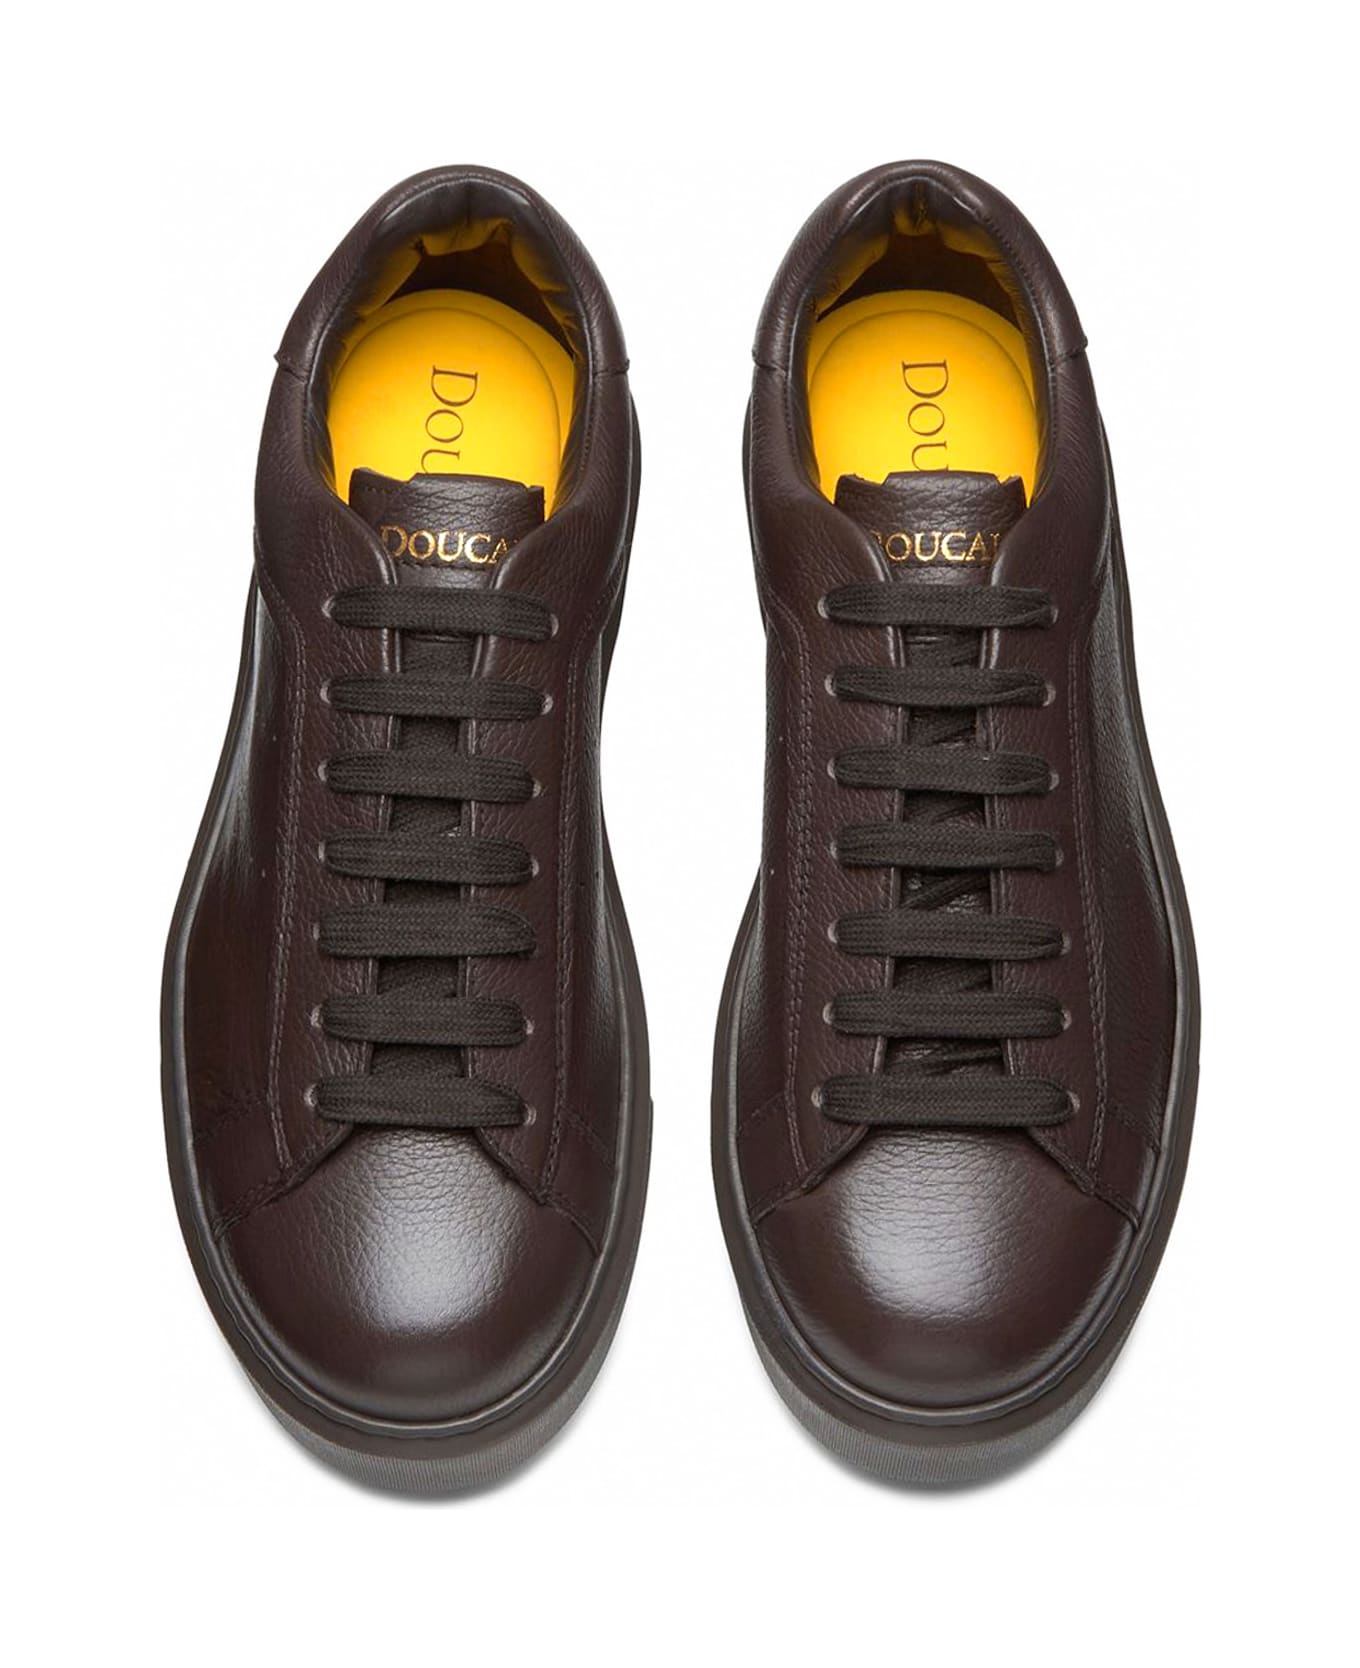 Doucal's Dark Brown Tumbled Leather Sneaker - Tabacco